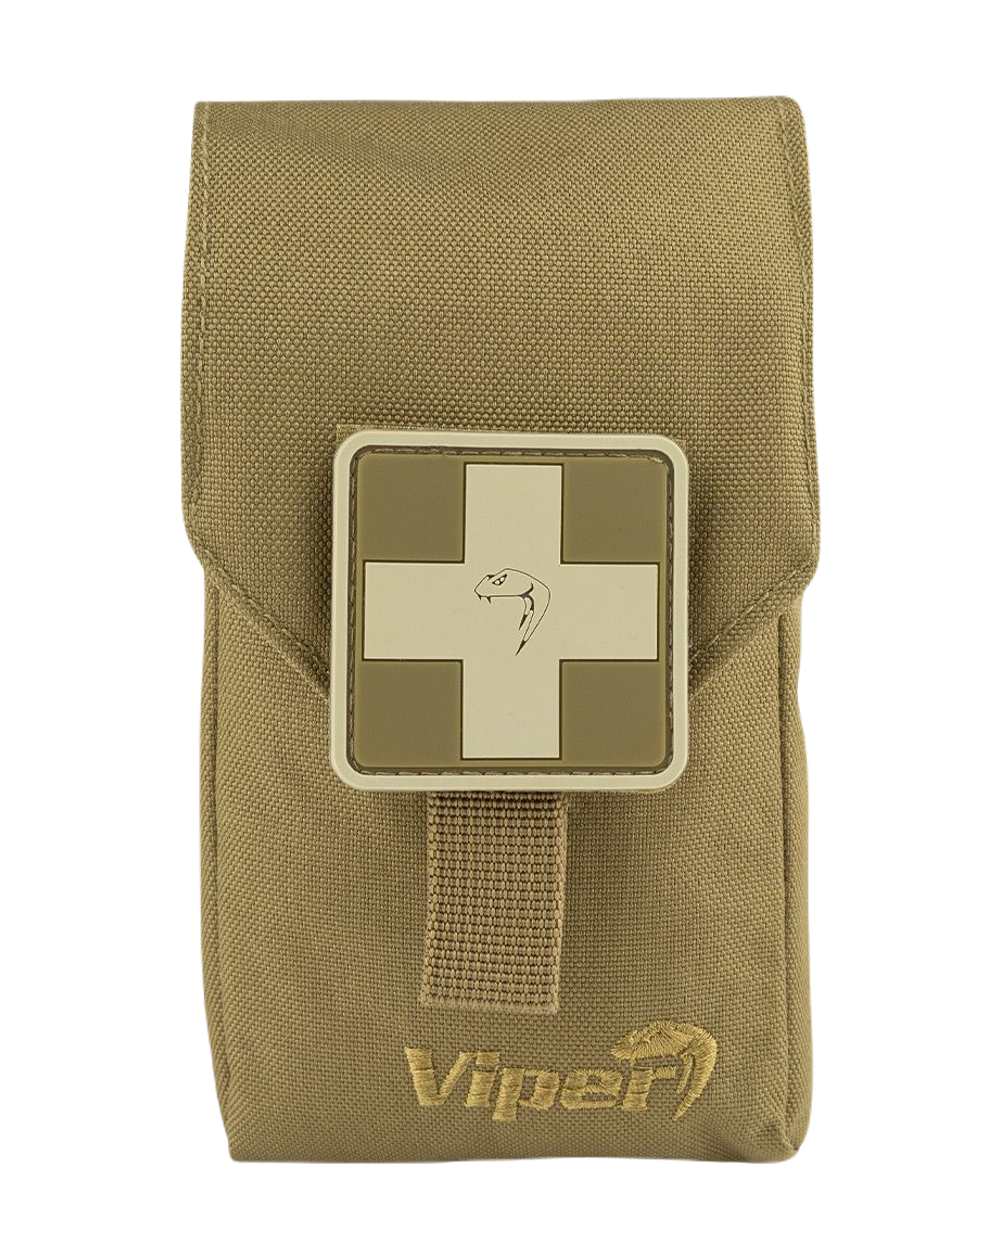 Viper First Aid Kit In Coyote 